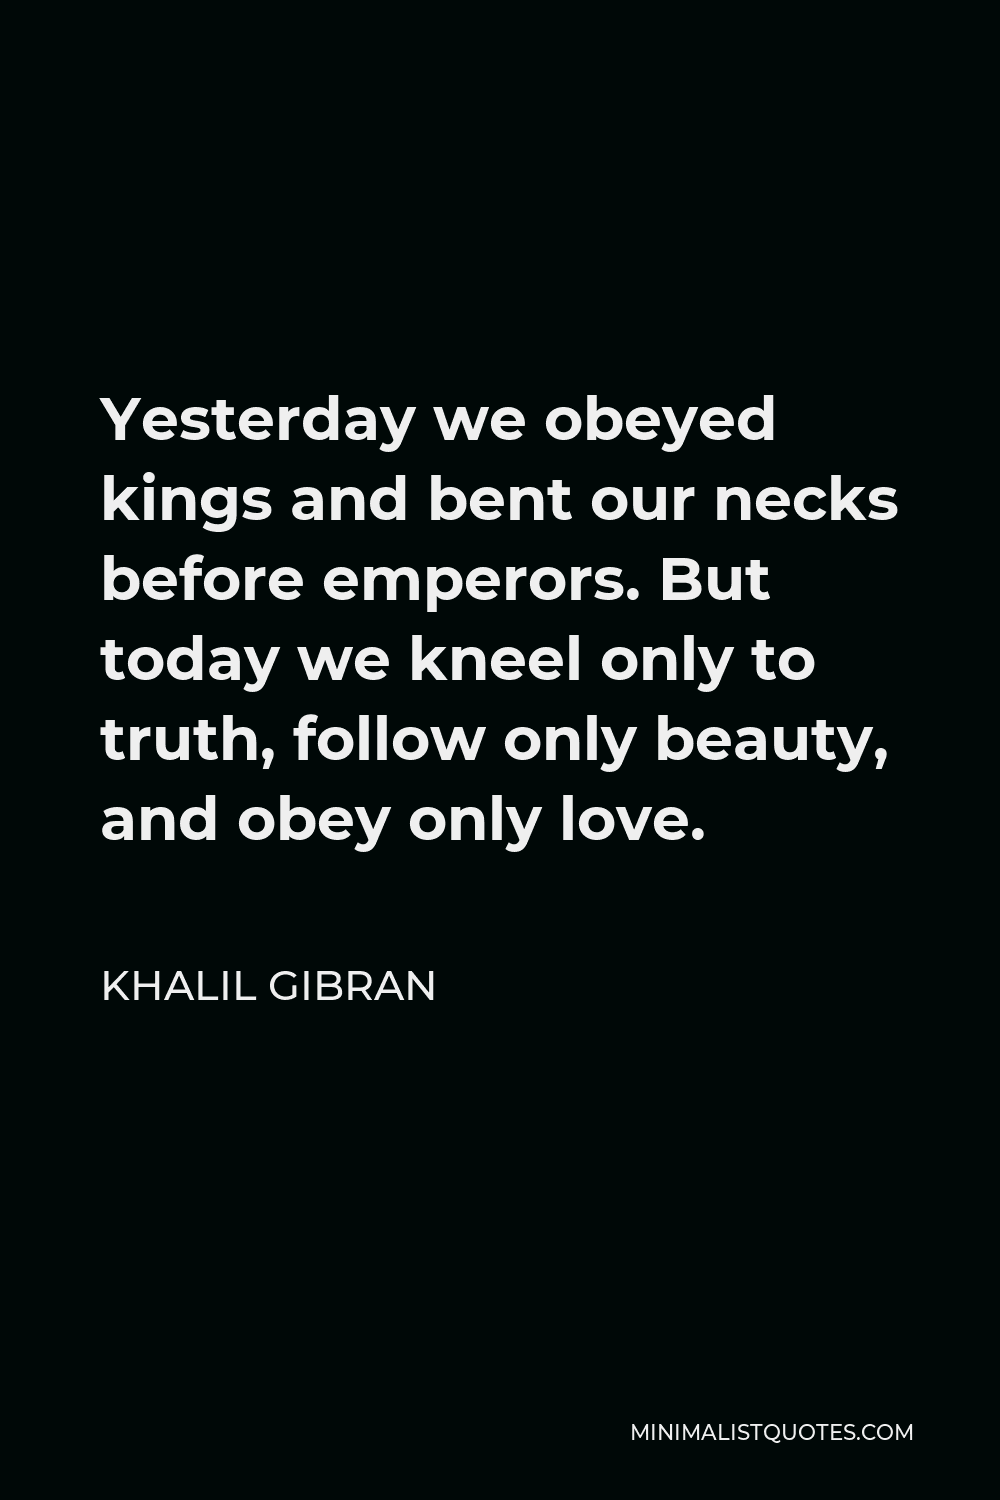 Khalil Gibran Quote - Yesterday we obeyed kings and bent our necks before emperors. But today we kneel only to truth, follow only beauty, and obey only love.